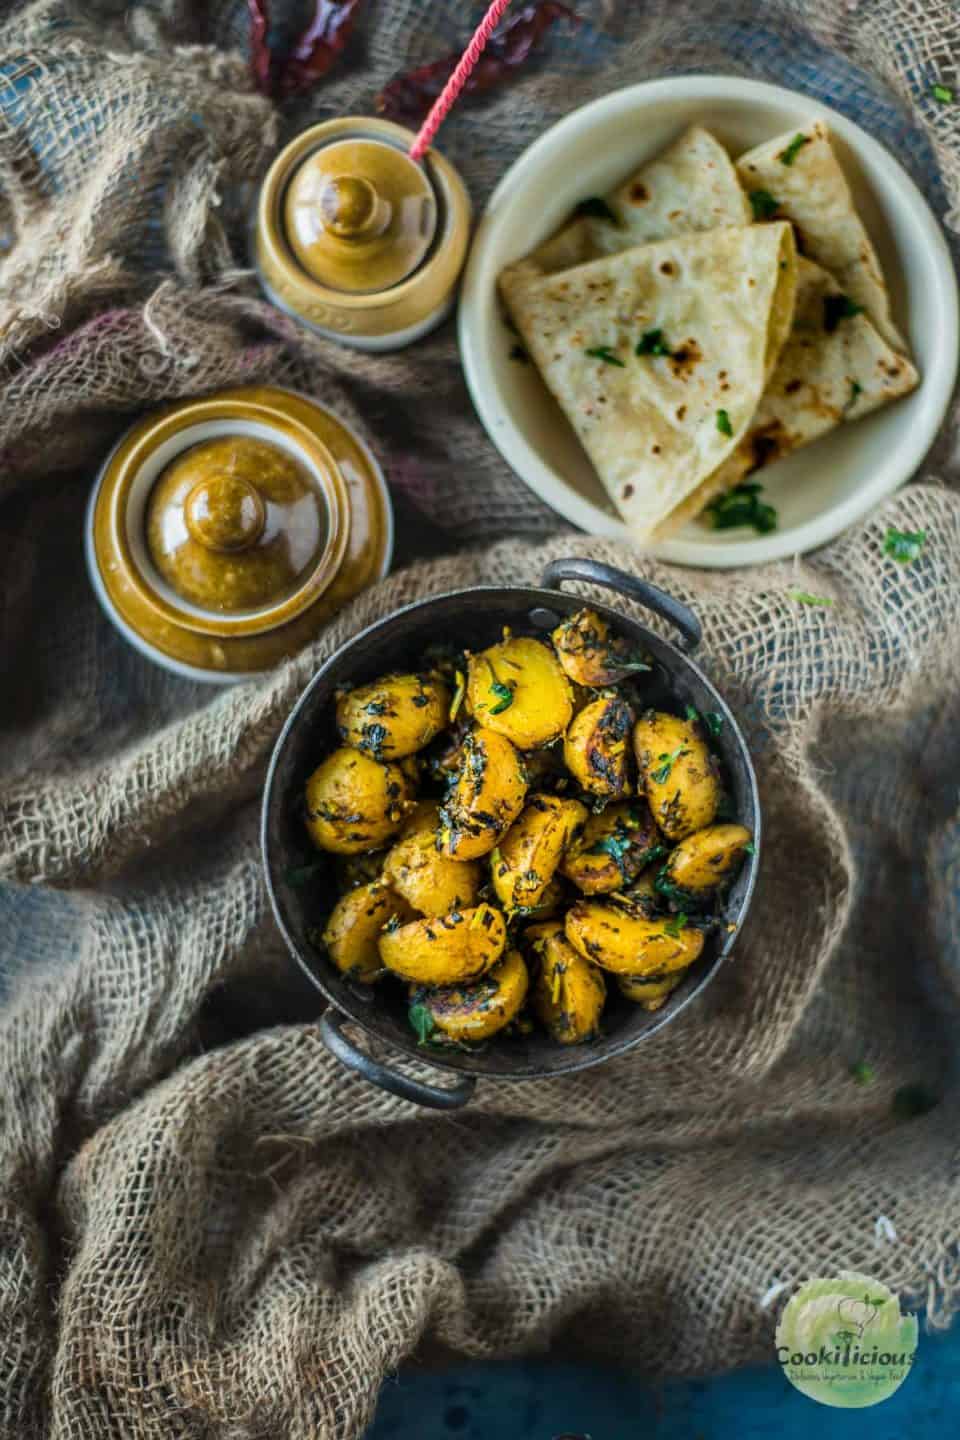 Aloo Methi served with chapati and pickle jars on the side